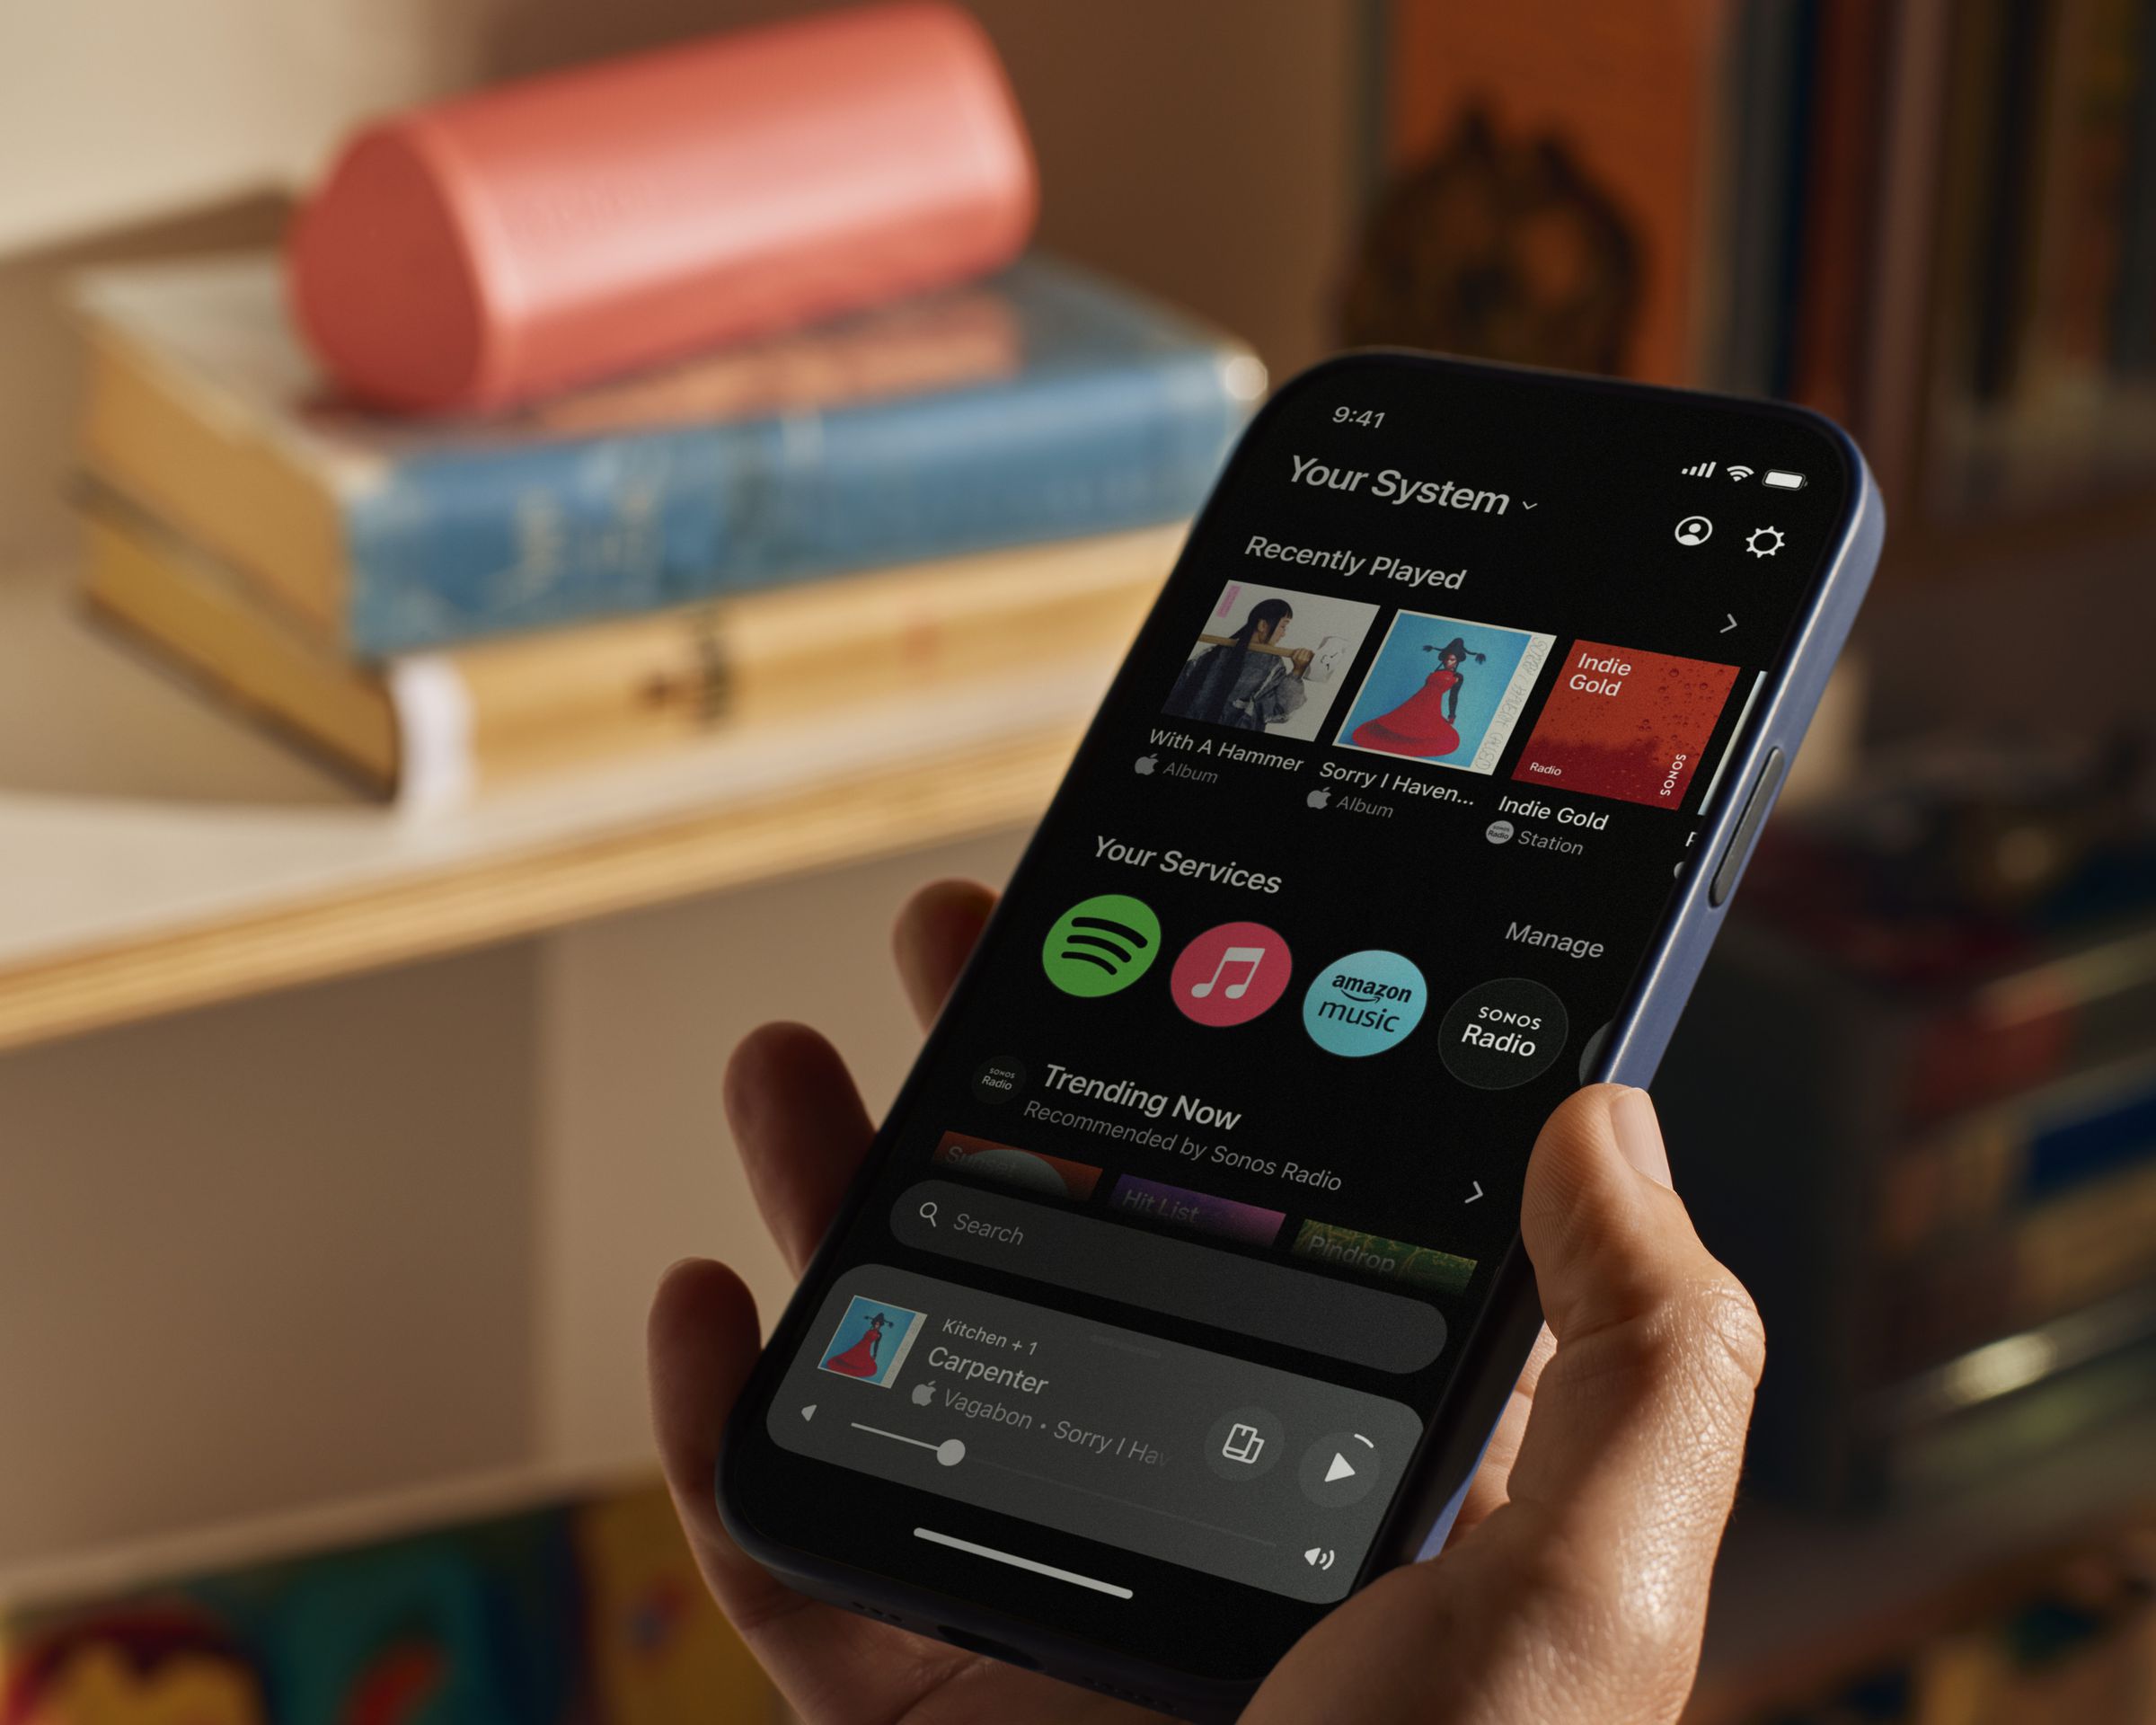 A marketing image of the new Sonos app.